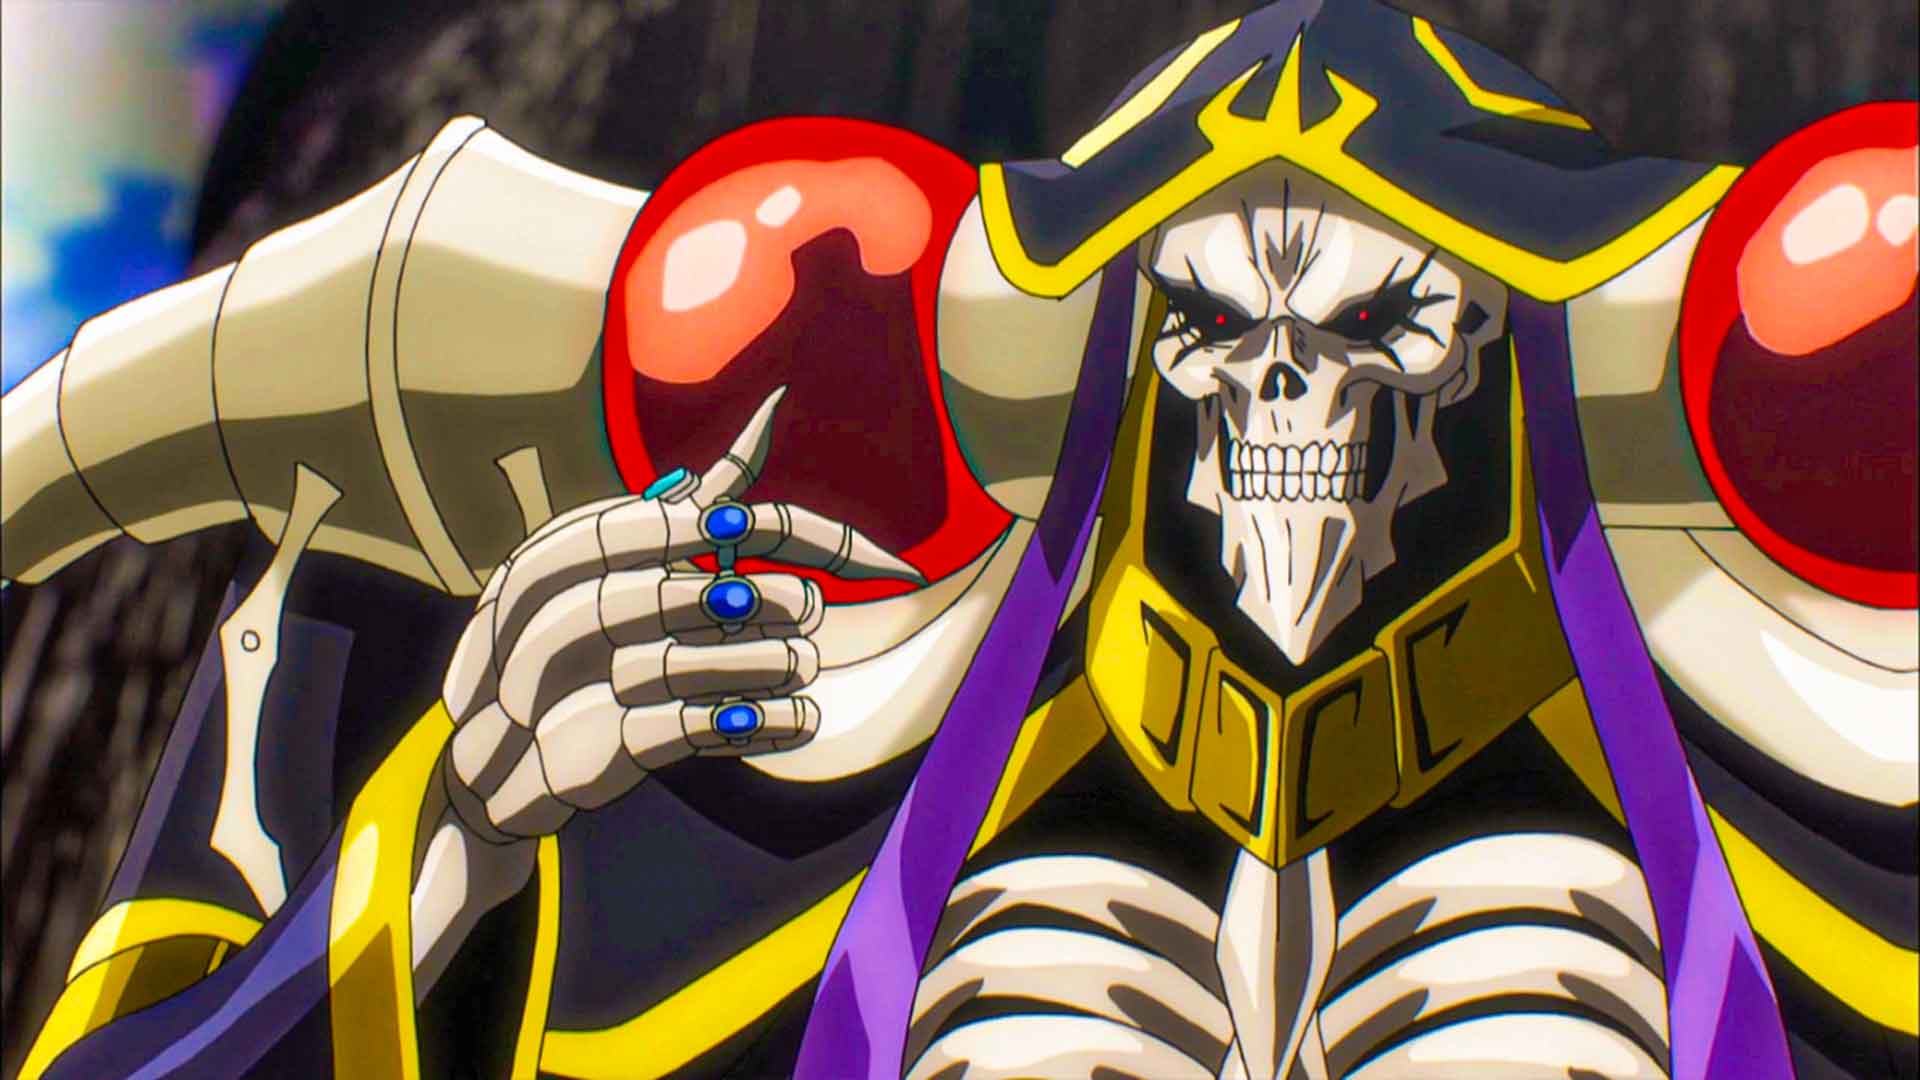 Who-Betrays-Ainz-in-the-Overlord